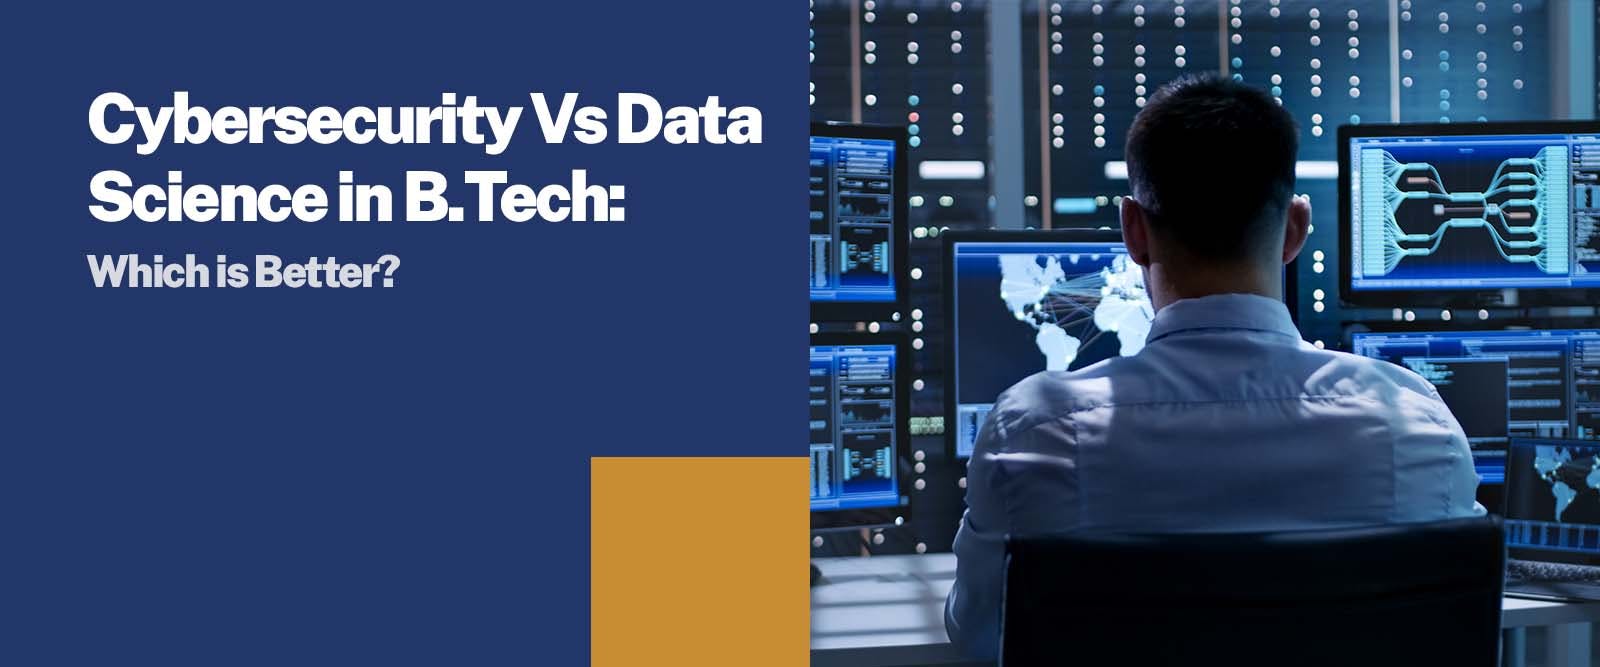 Cybersecurity Vs Data Science in B.Tech: Which is Better? 